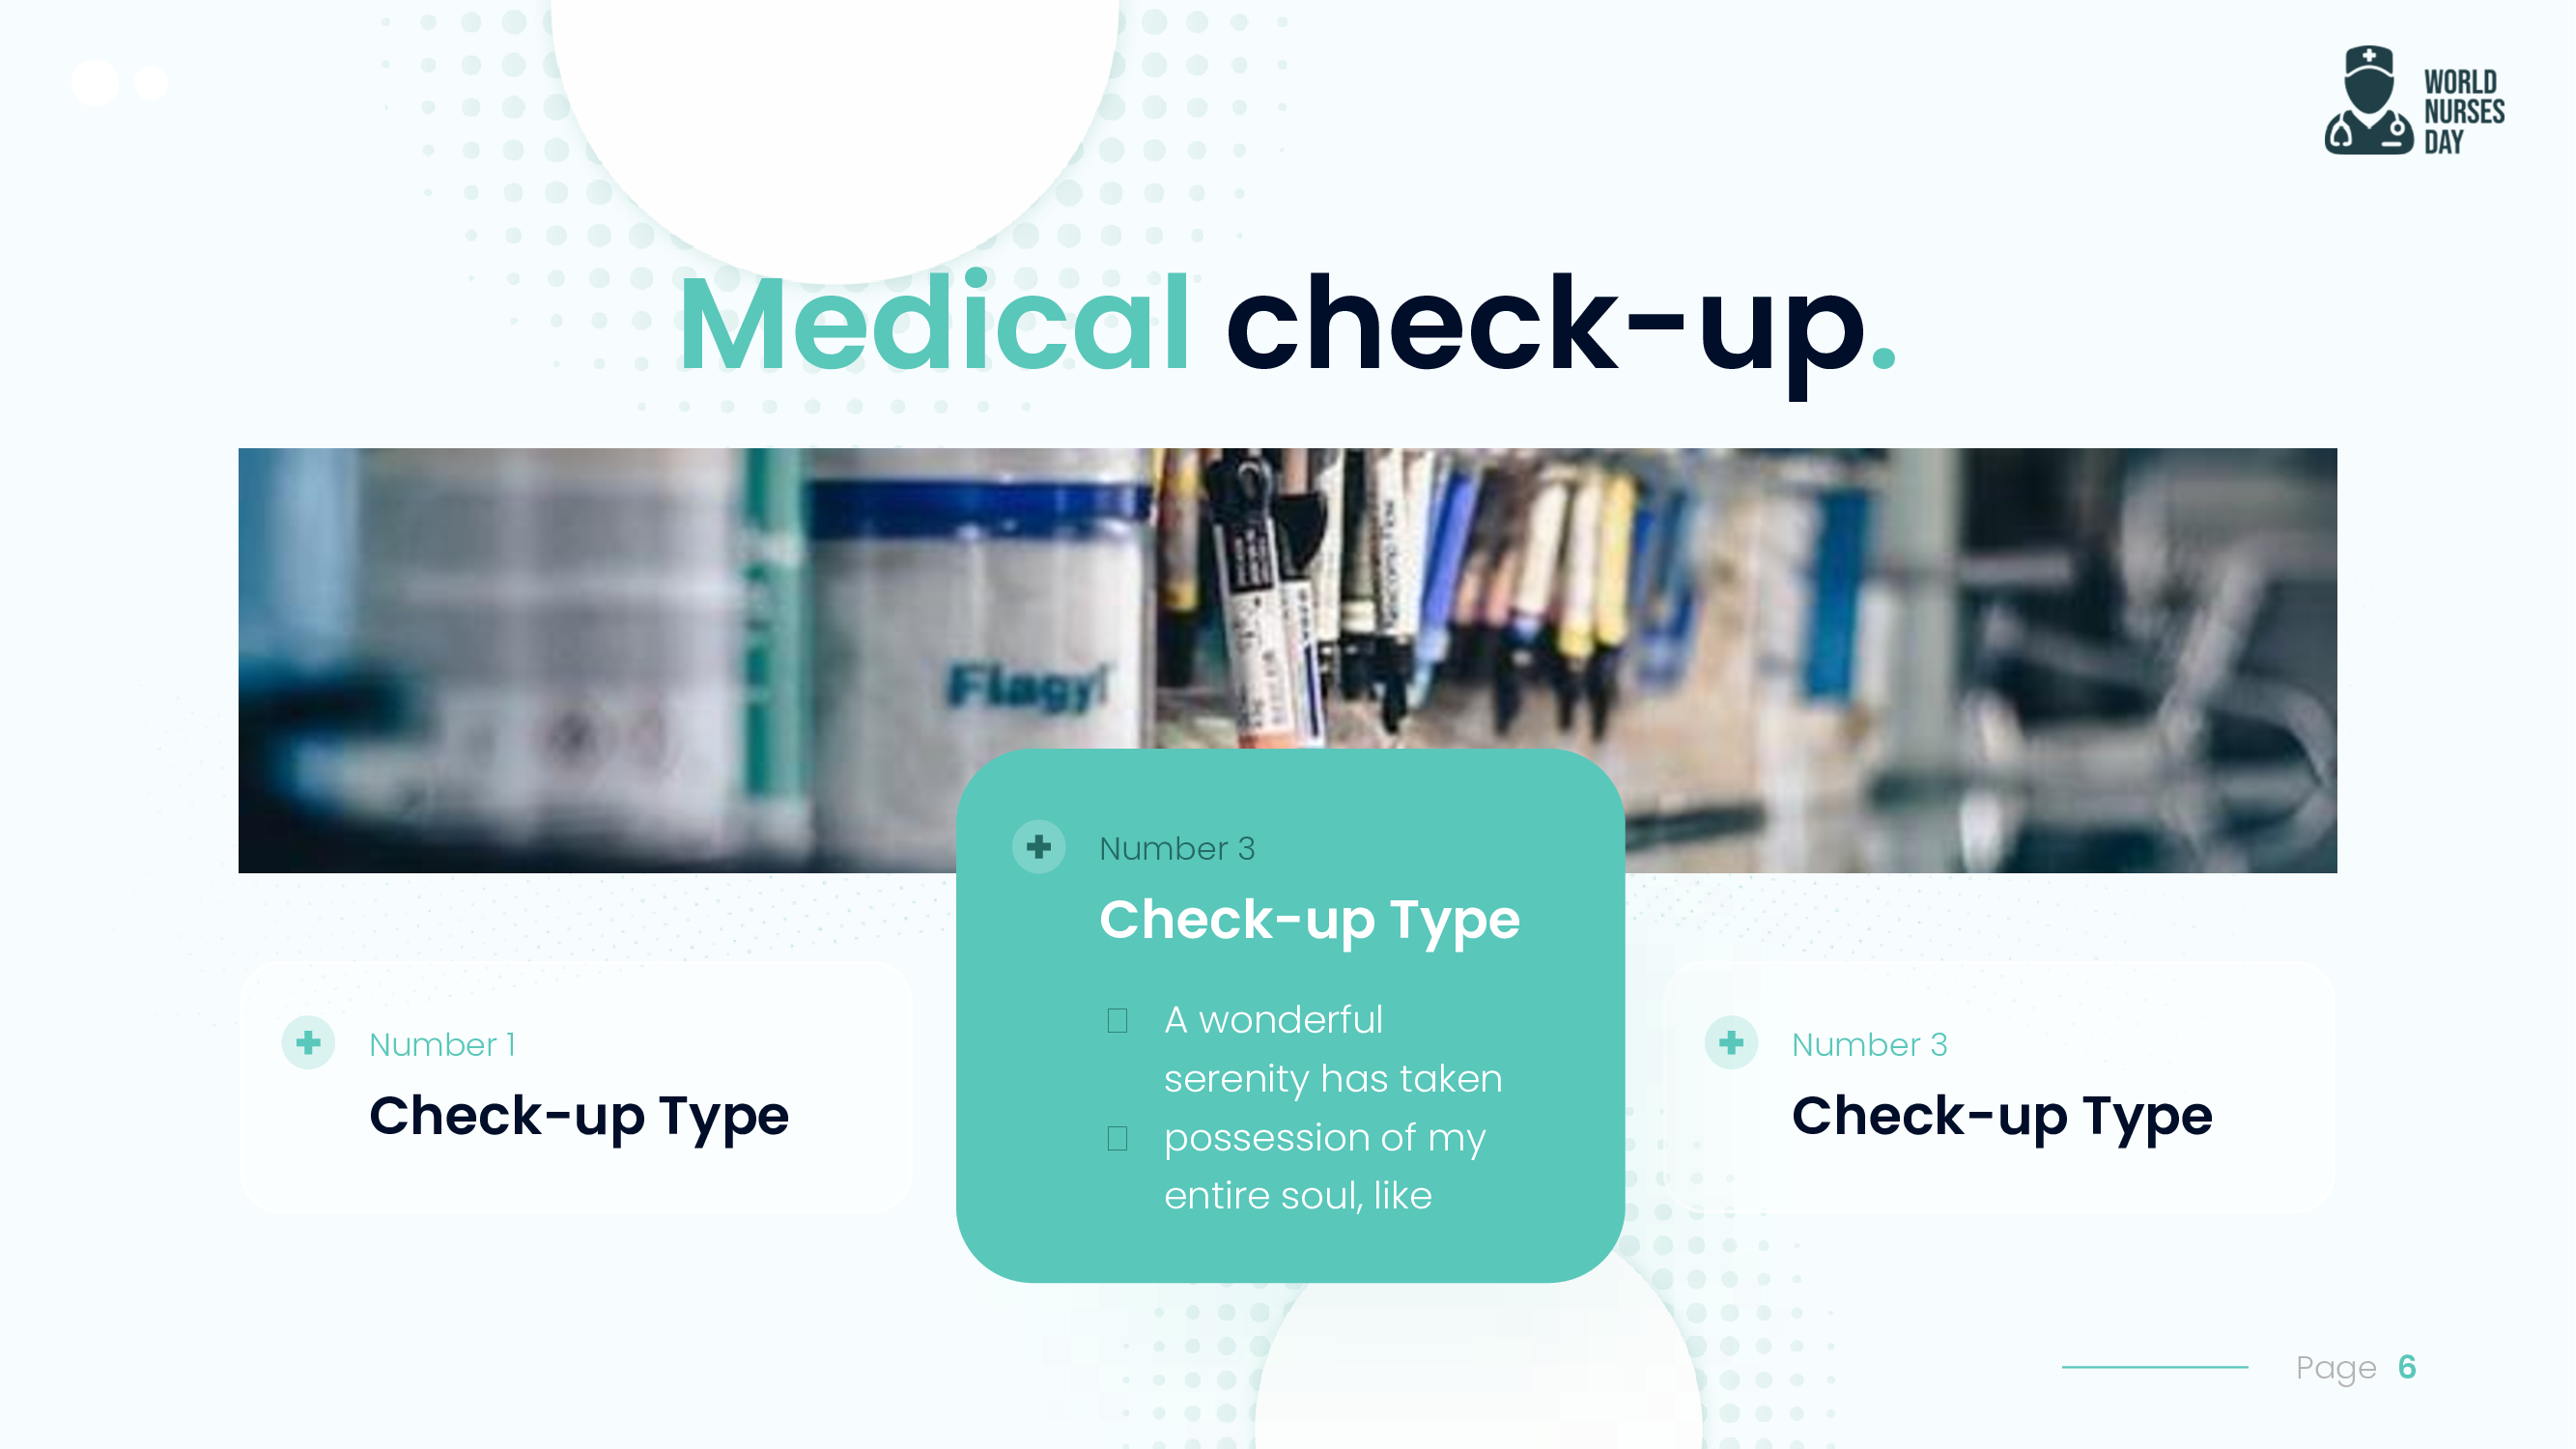 Choose a medical check-up type.